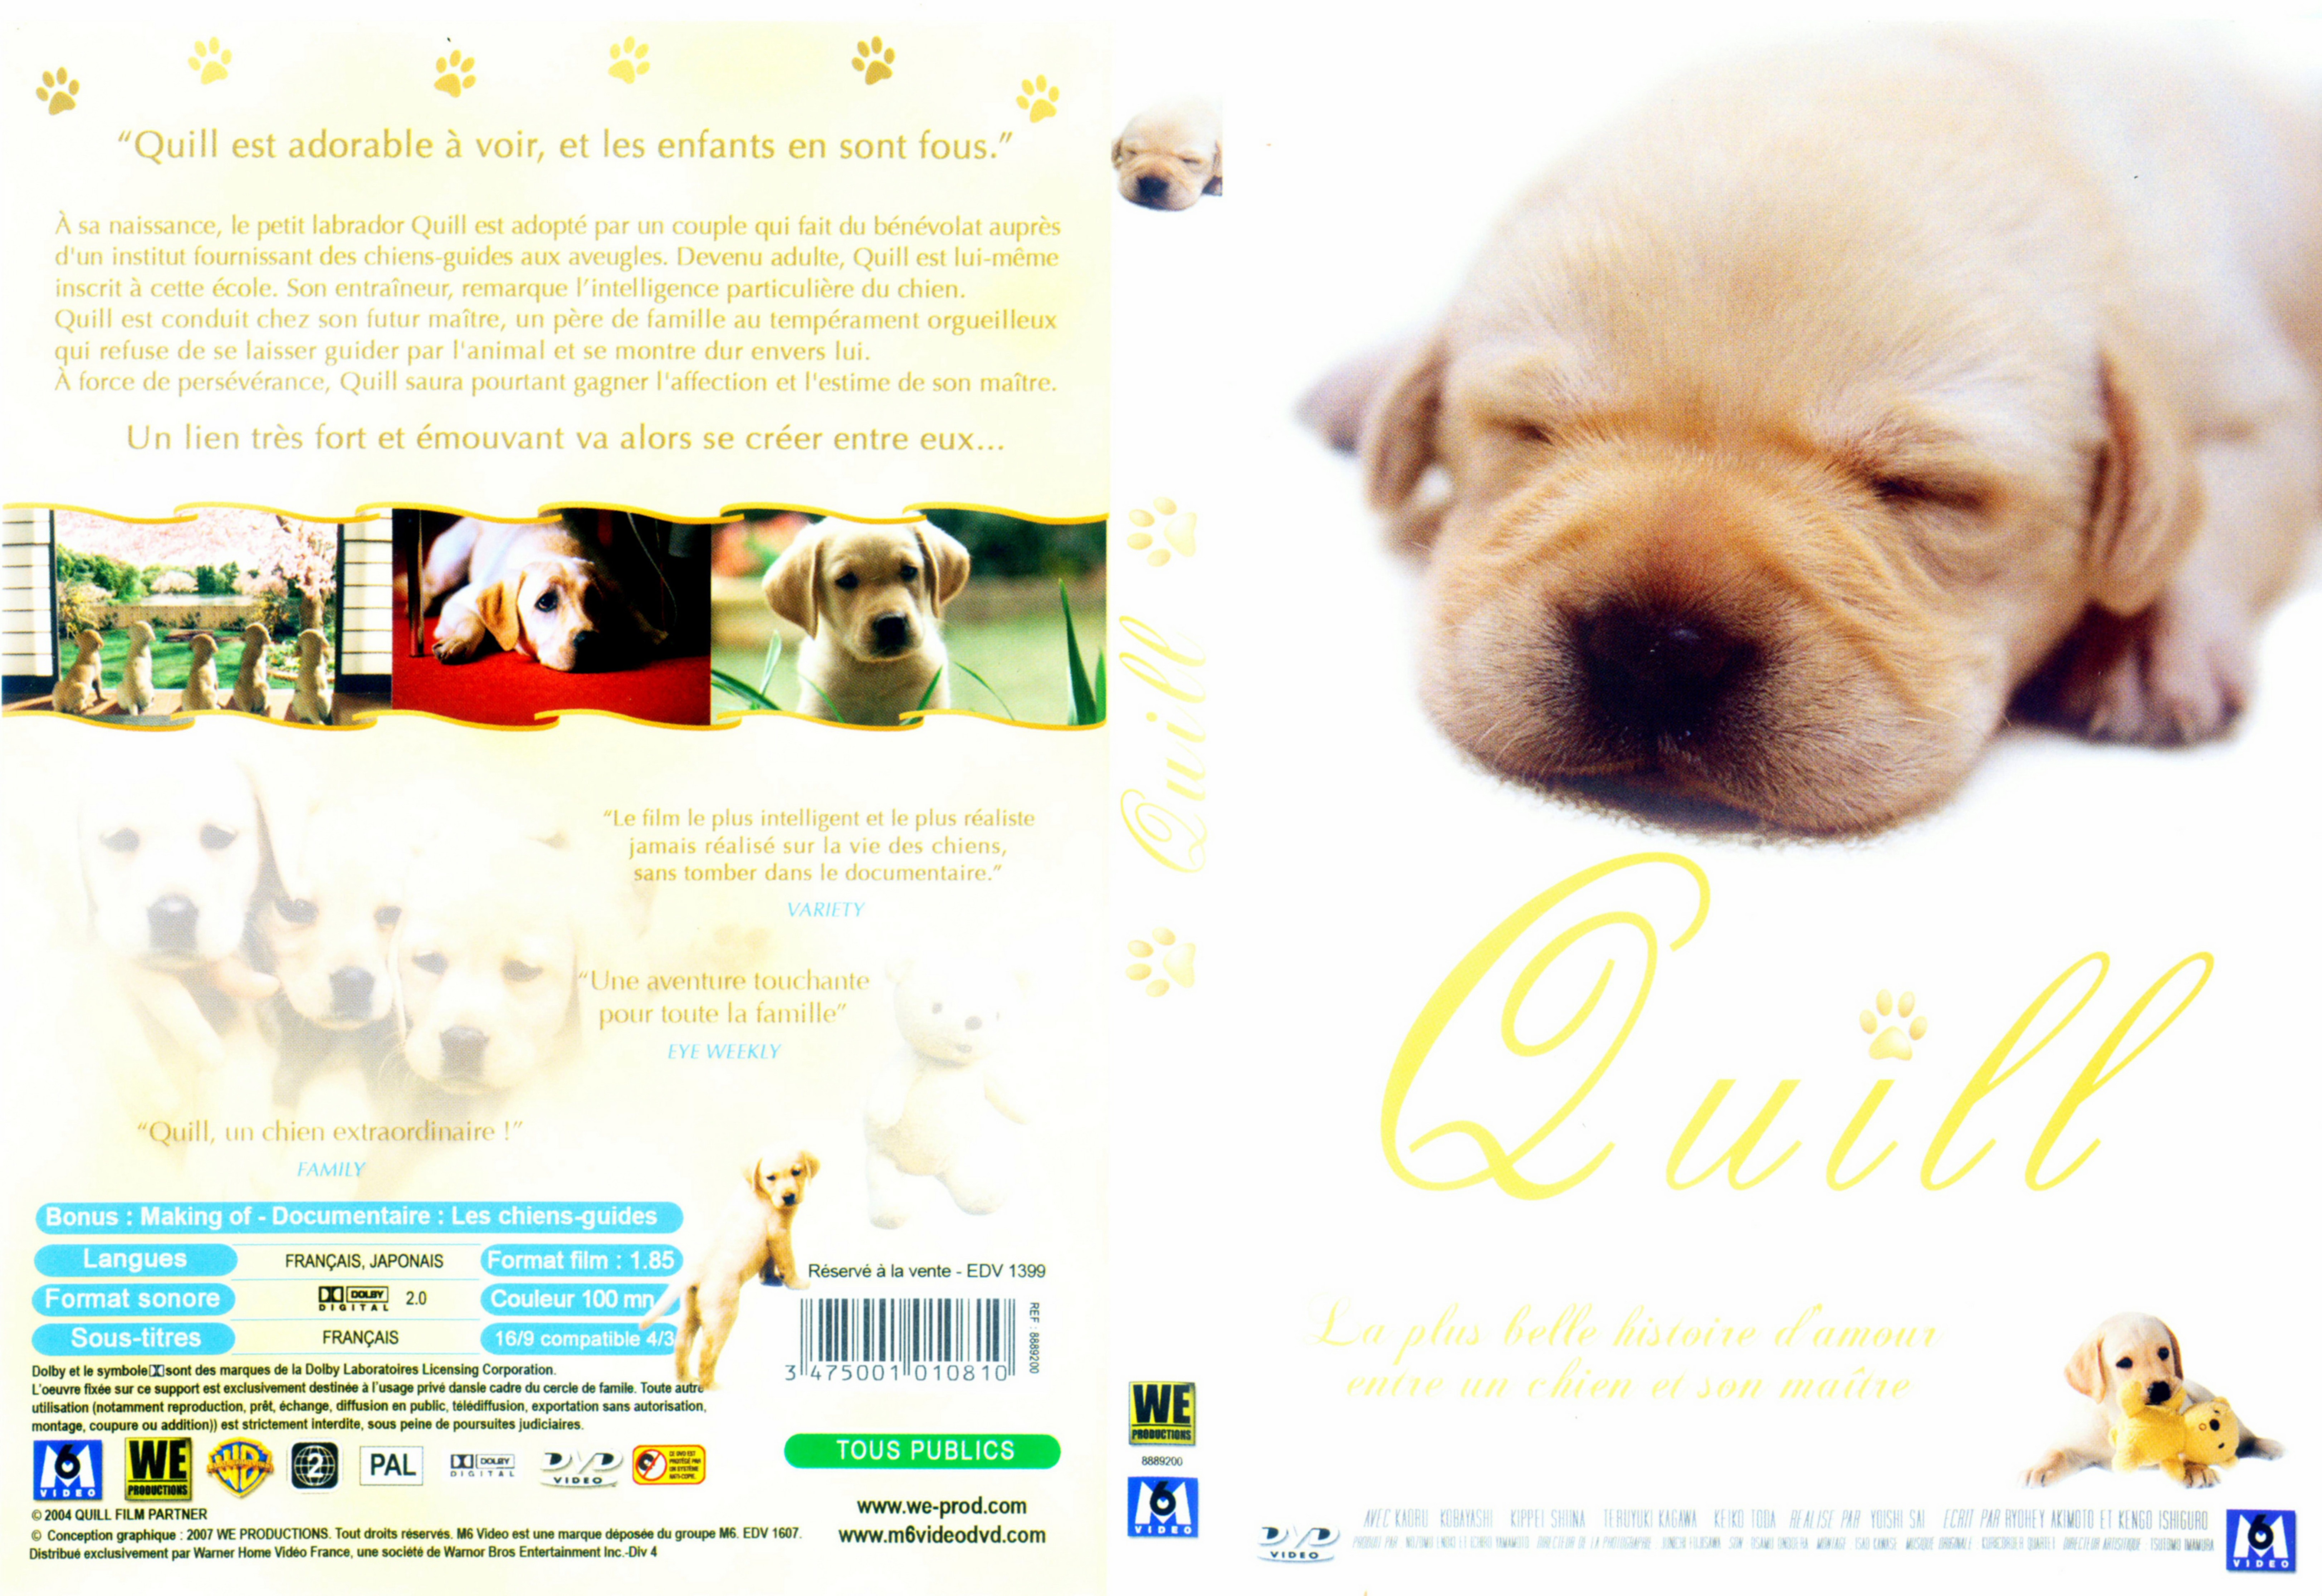 Jaquette DVD Quill